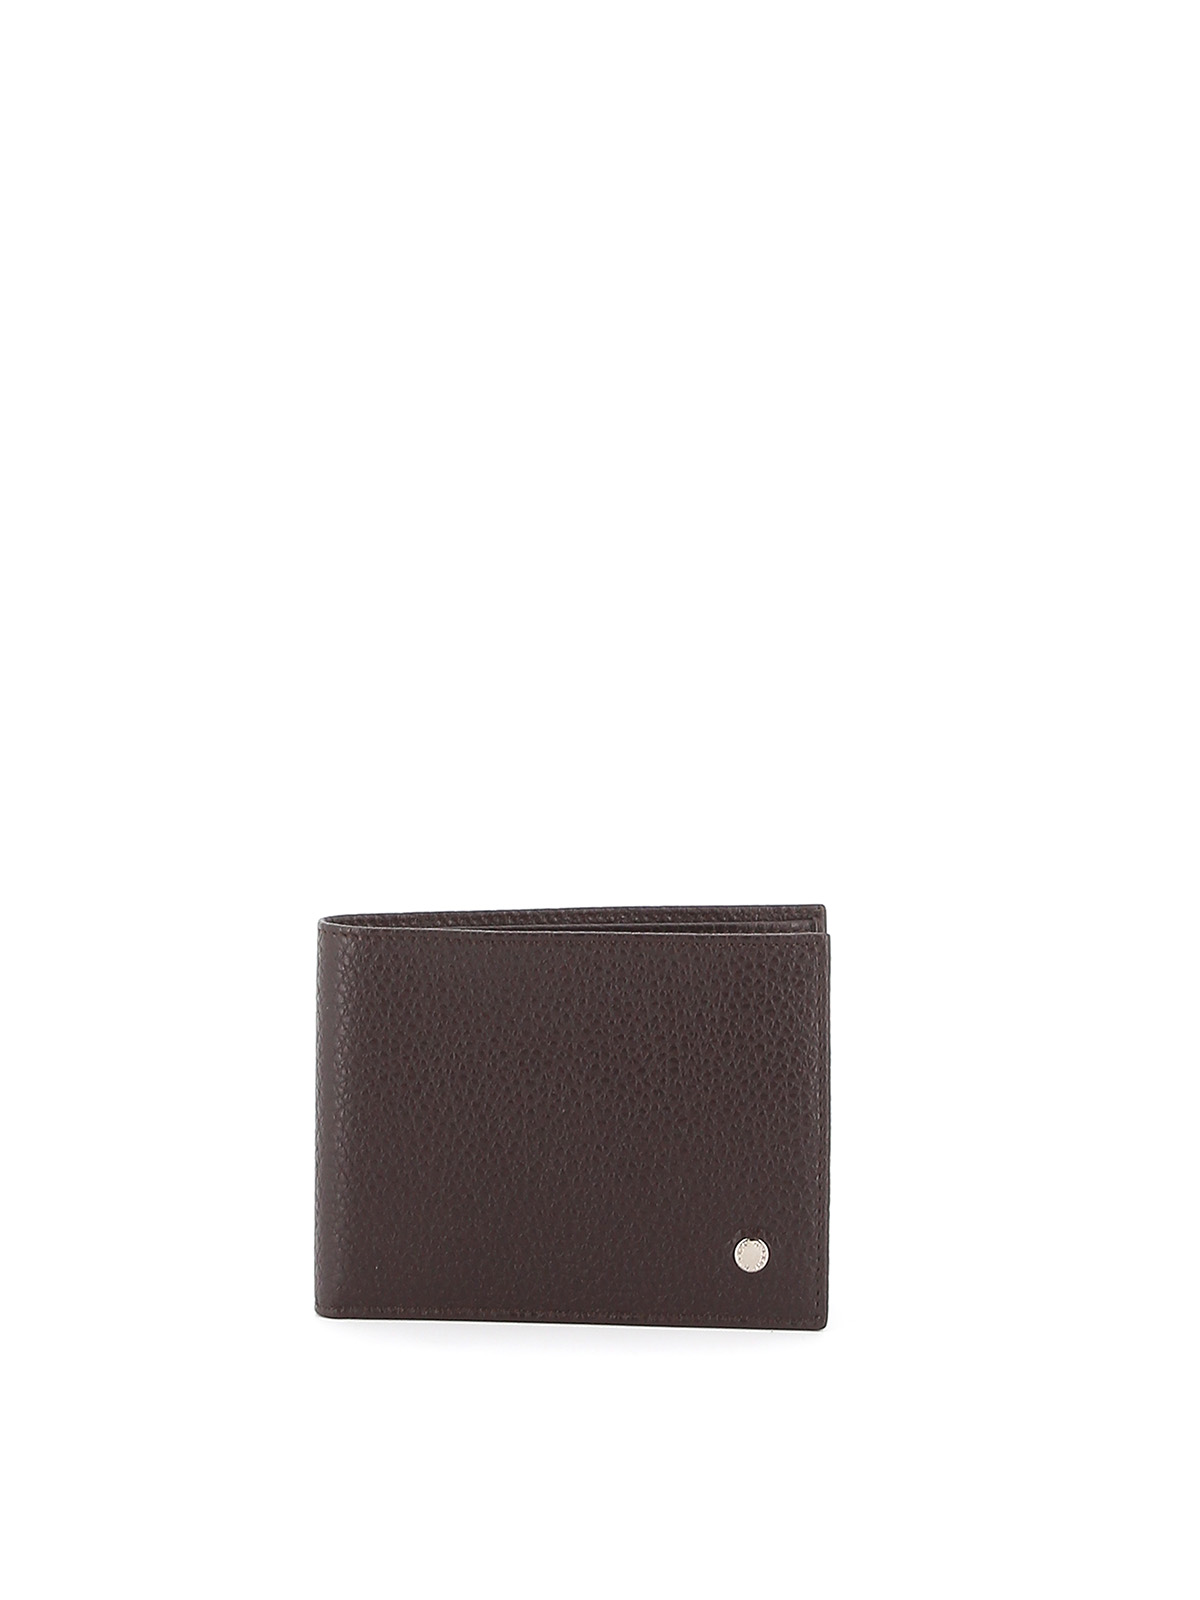 ORCIANI GRAINY LEATHER BIFOLD WALLET